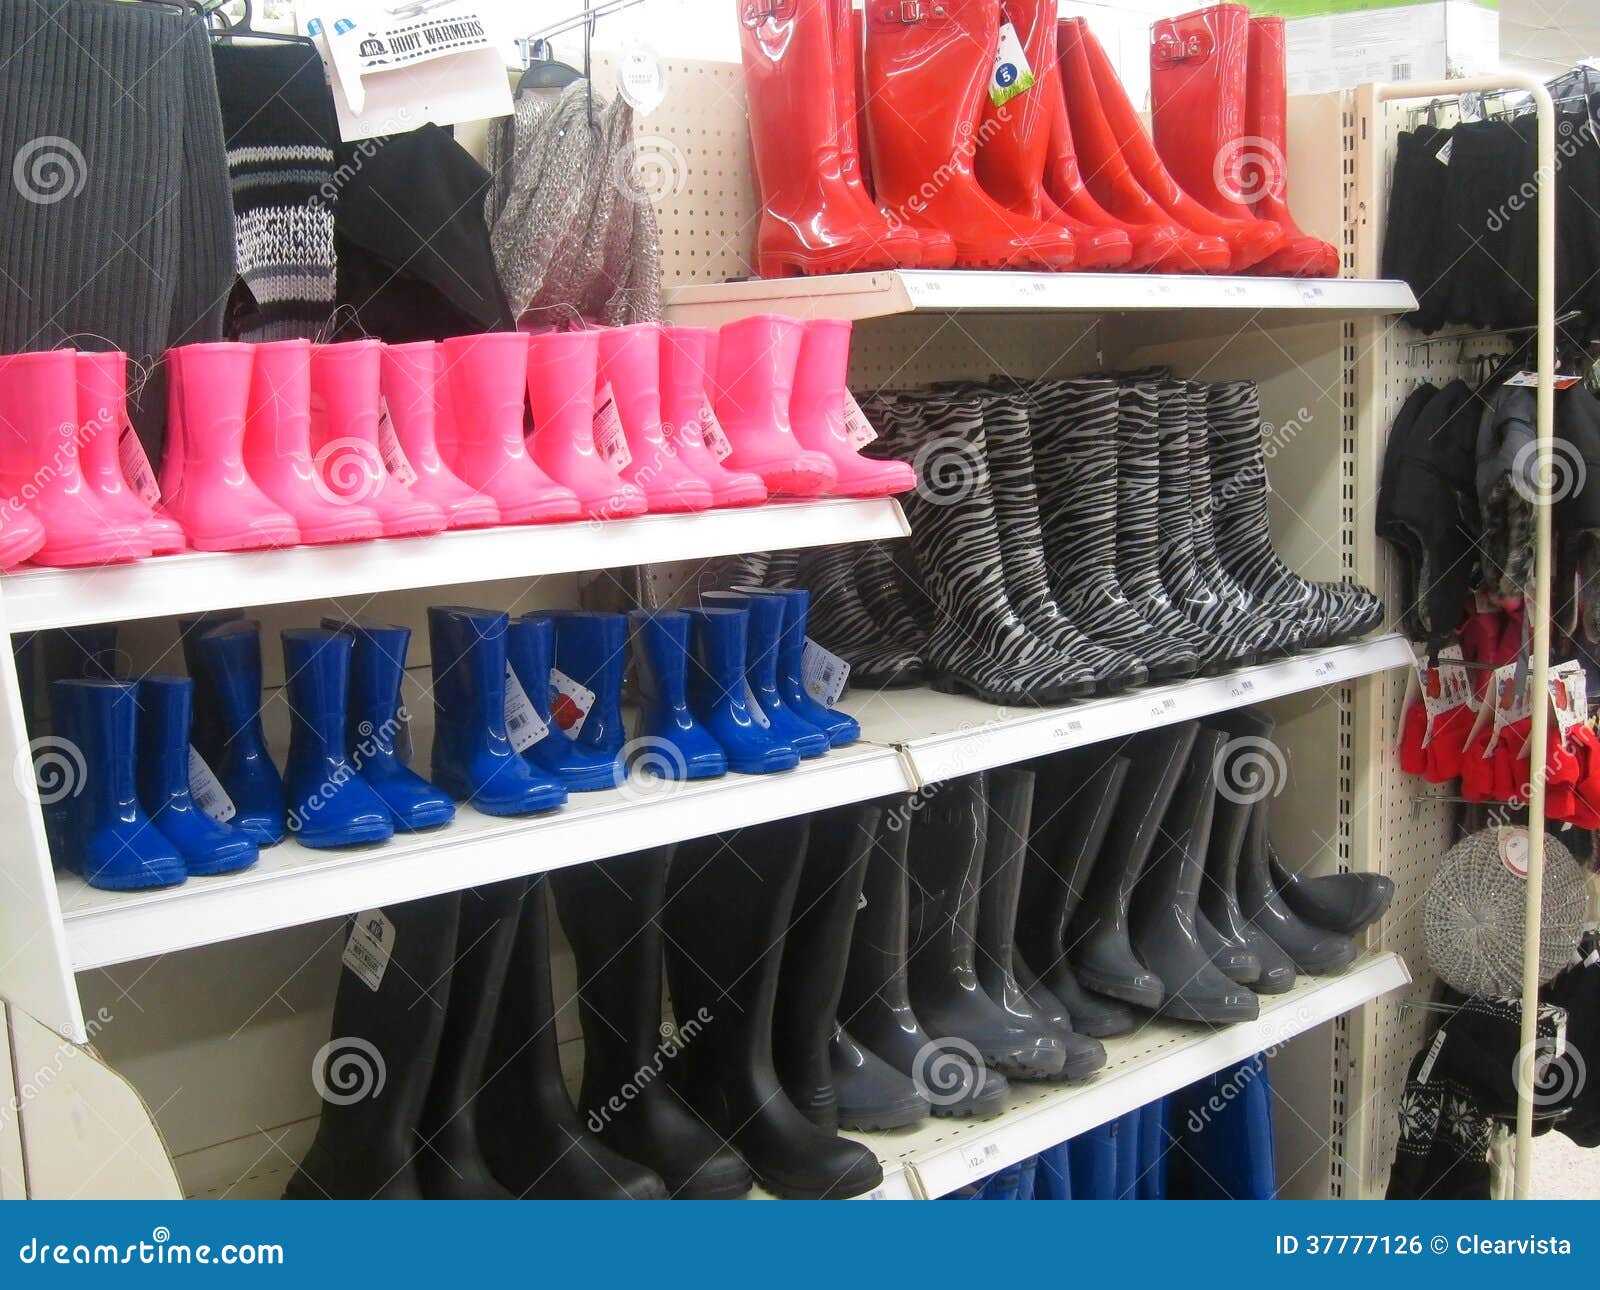 Wellington, Rubber Or Rain Boots In A 